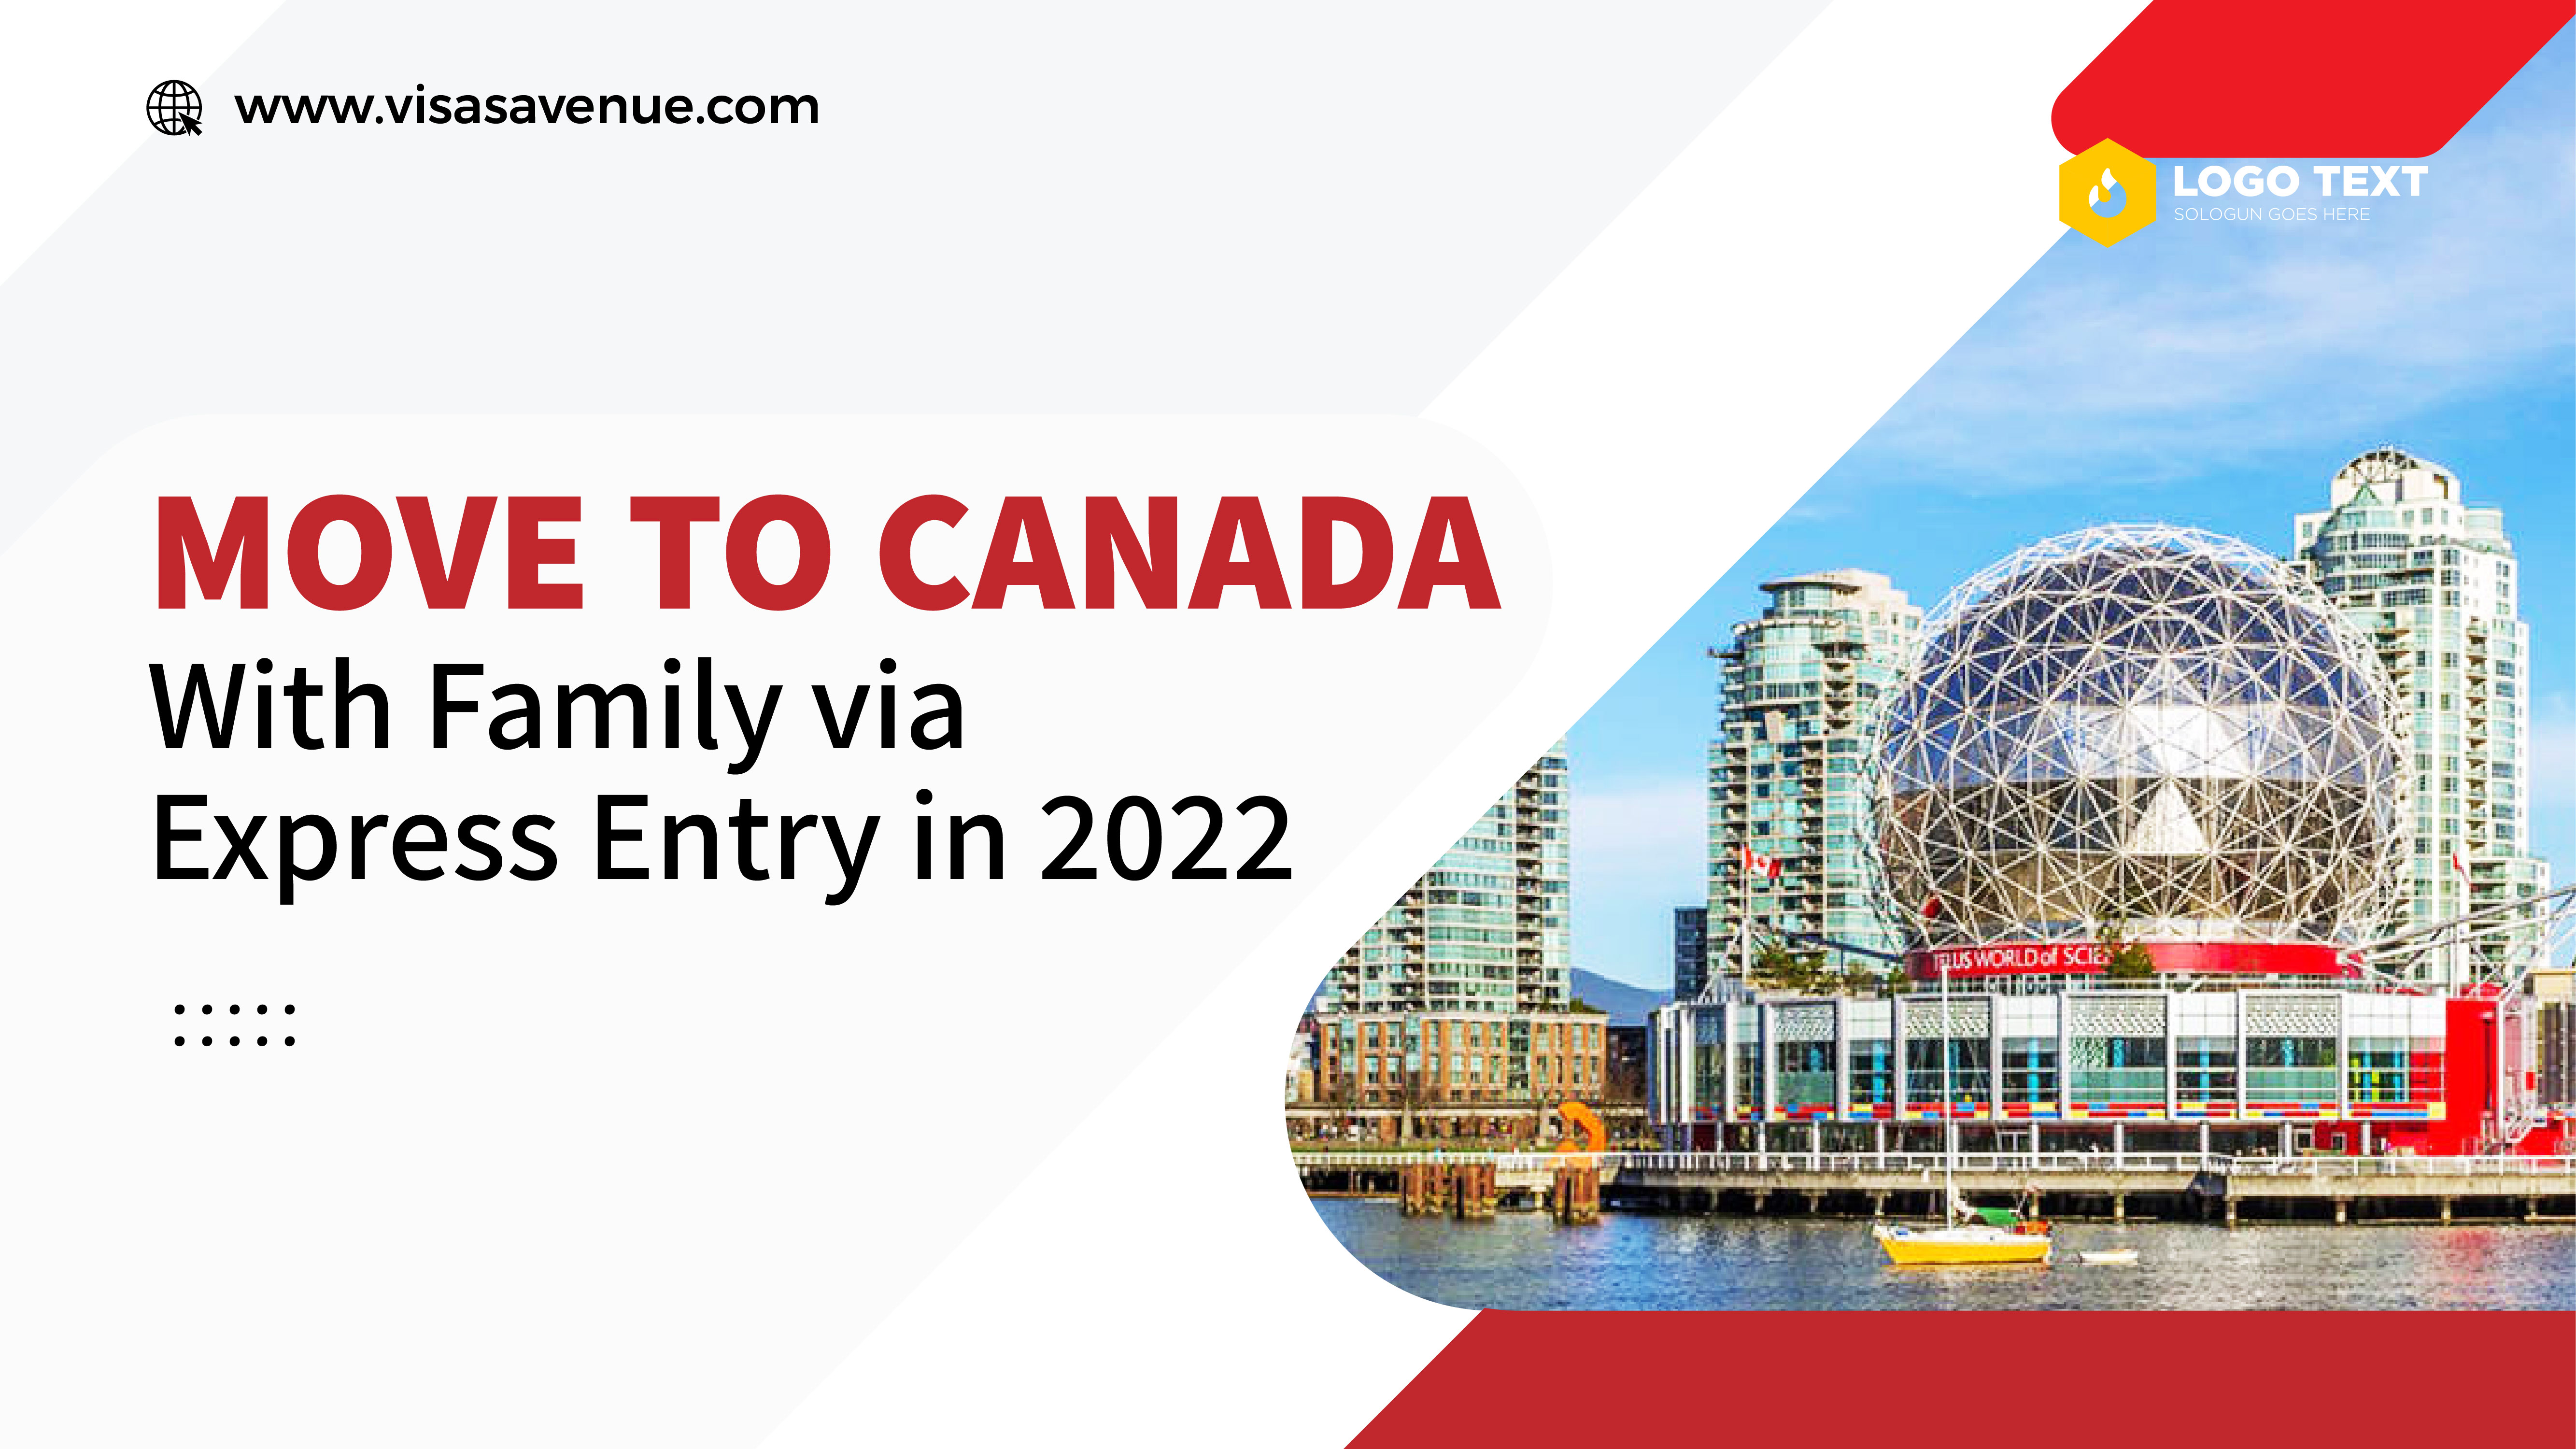 Move to Canada with Family via Express Entry in 2022